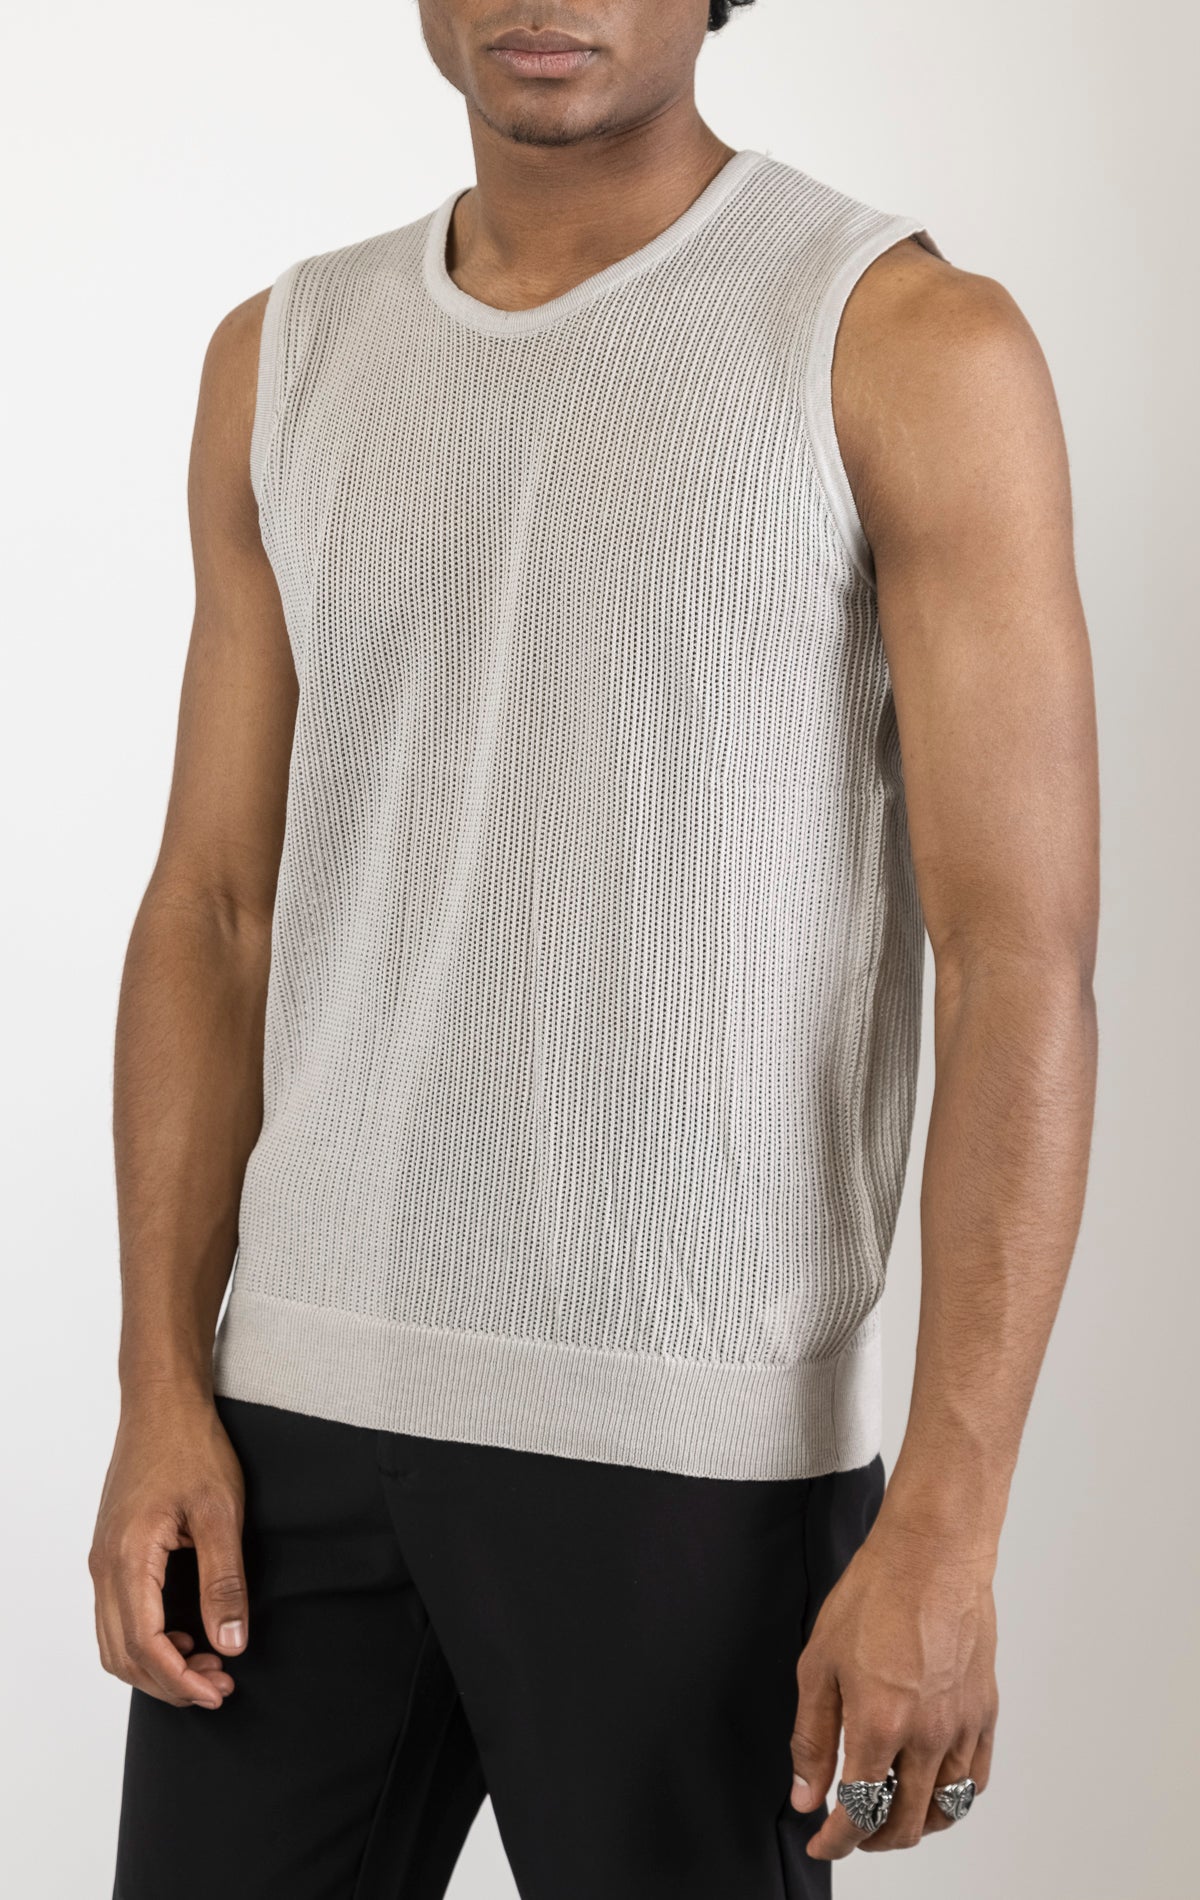 Men's crew neck mesh tank top in grey. The tank top is made from a lightweight and breathable mesh fabric (50% cotton, 50% acrylic) and features a sleeveless construction and a tailored fit.